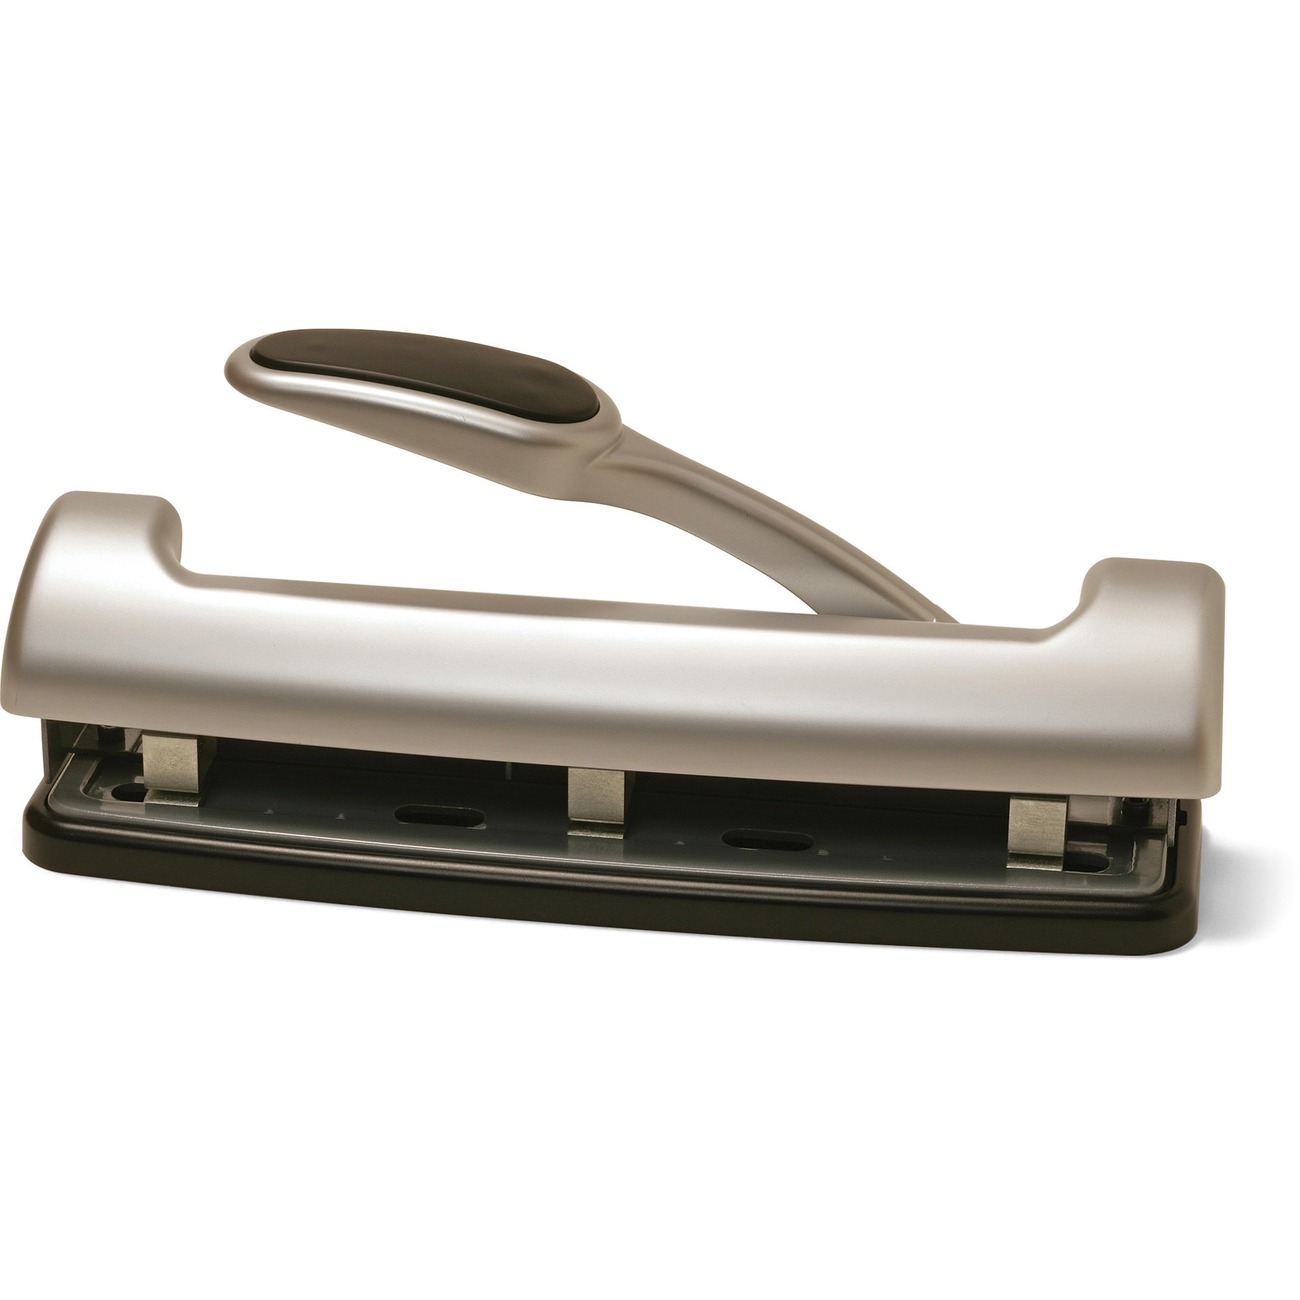 CARL Extra Heavy-duty Two-hole Punch - 2 Punch Head(s) - 300 Sheet Capacity  - 1/4 Punch Size - Round Shape - Silver 